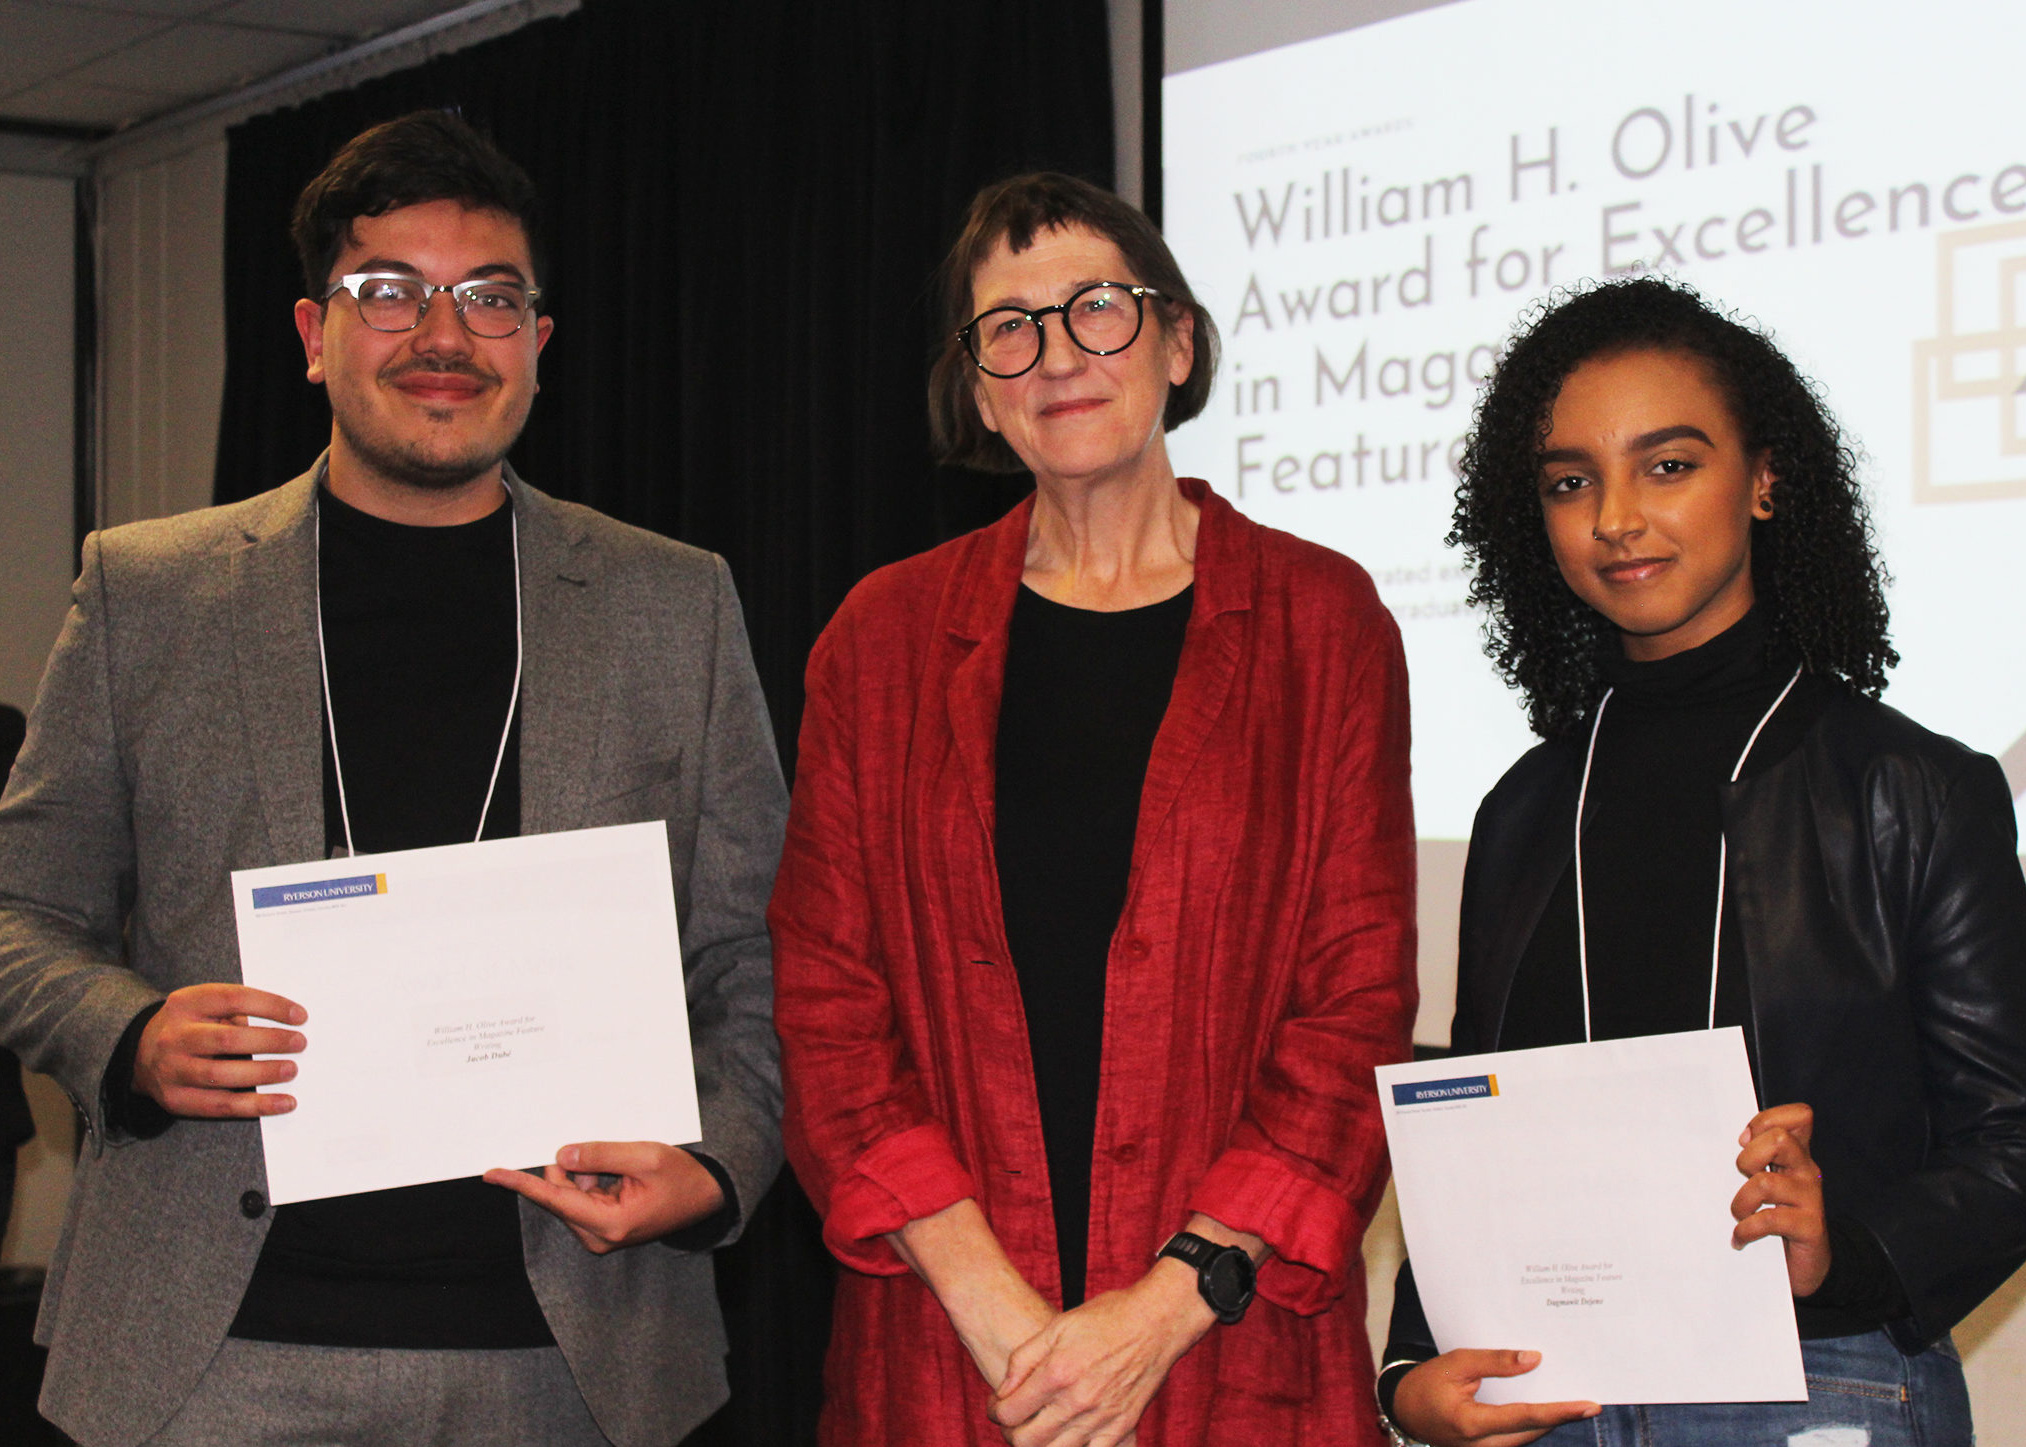 William H. Olive Award for Excellence in Magazine Feature Writing recipient Jacob Dube (l) and Dagmawit Dejene (r) with Awards Committee Chair Jagg Carr-Locke.